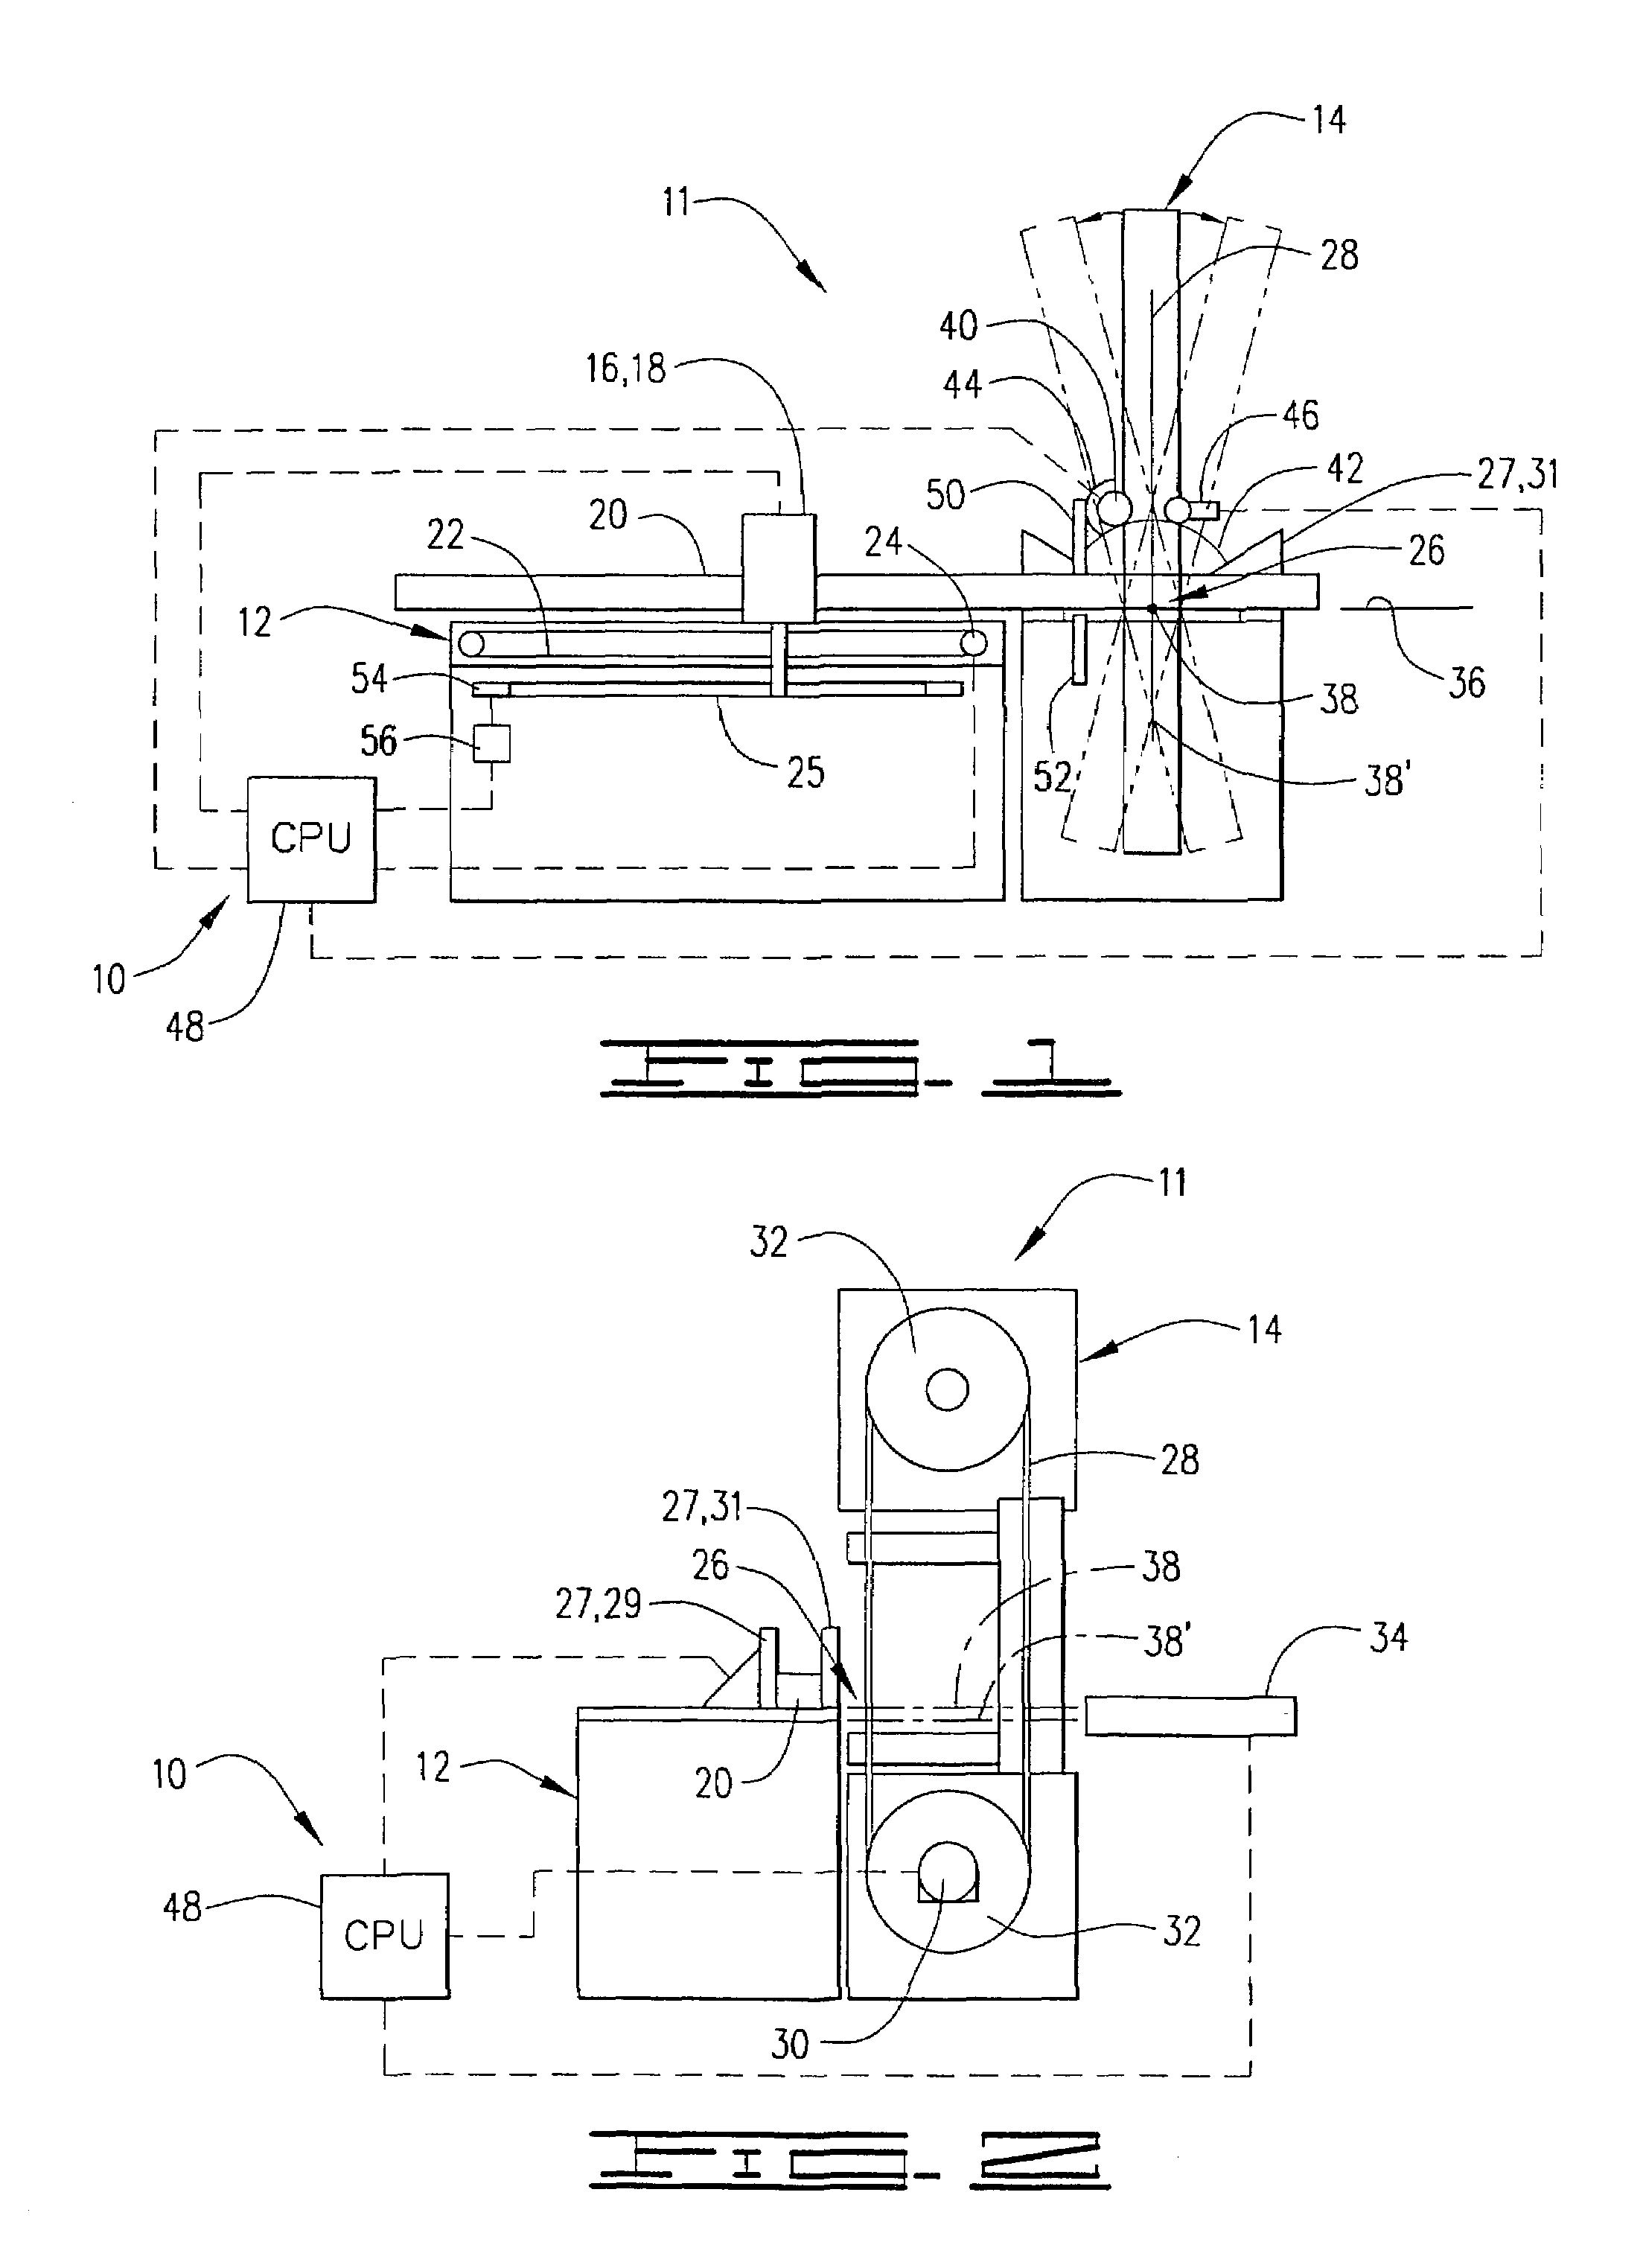 Active measurement and control system for a material cutting apparatus